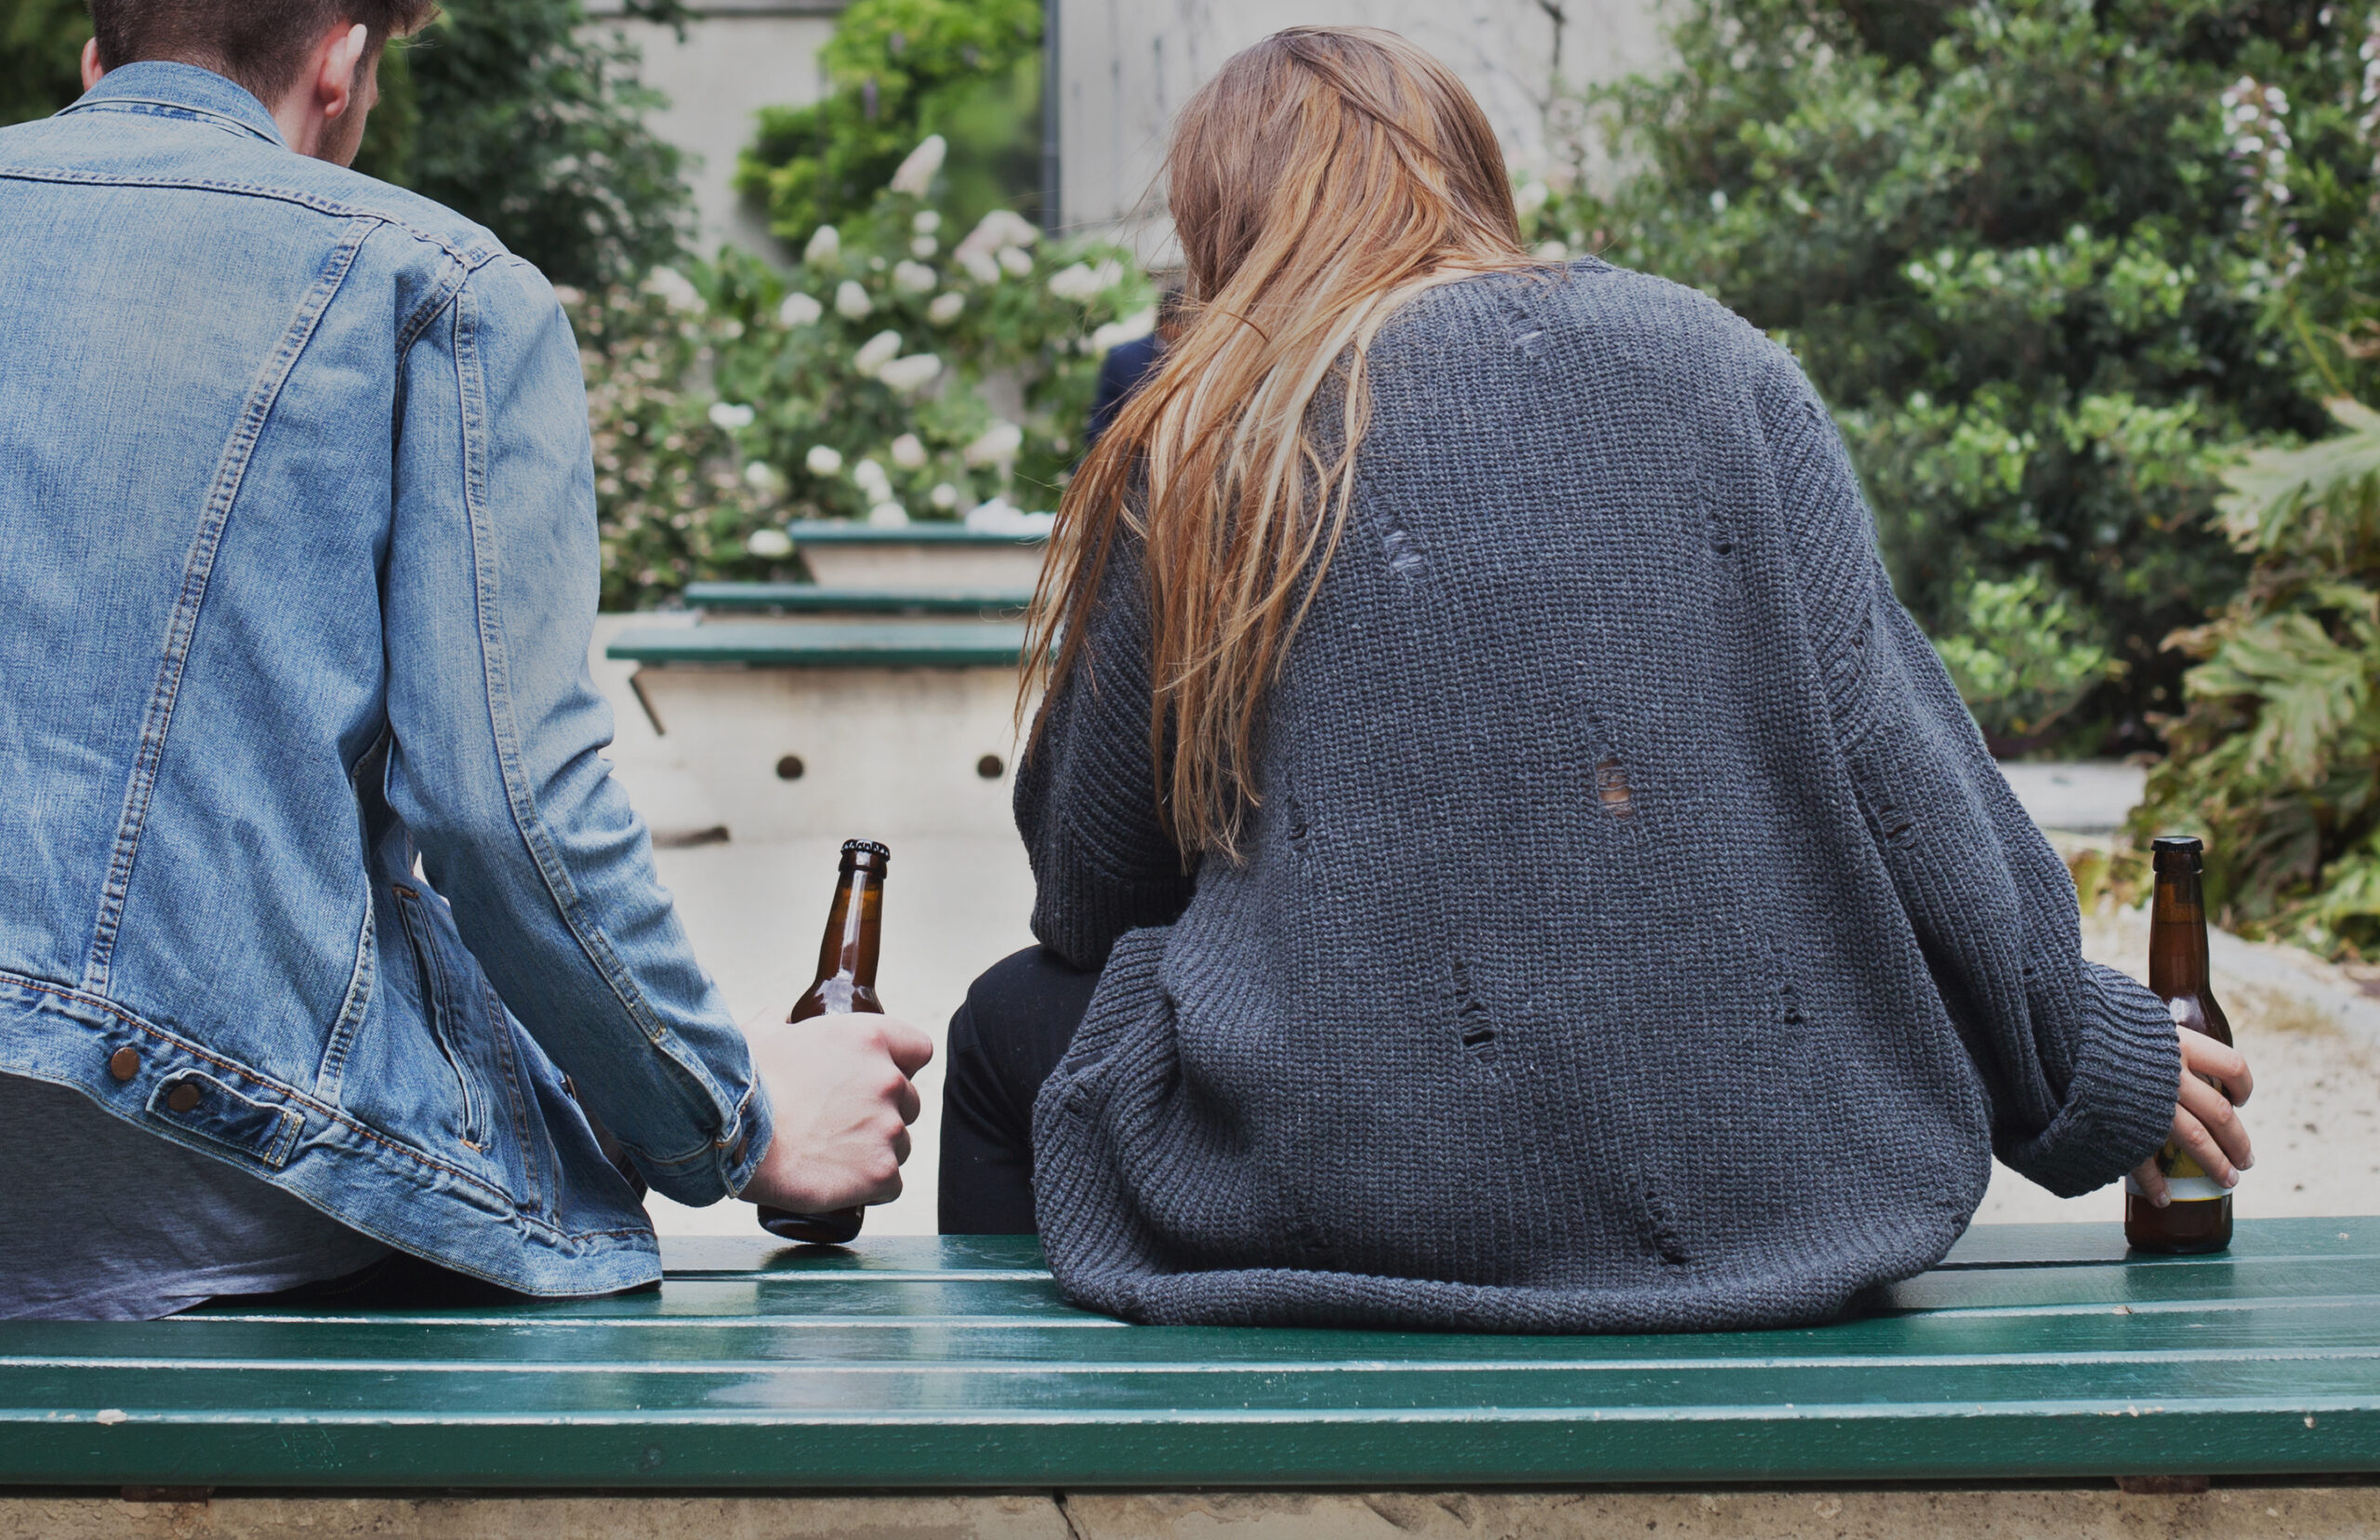 A teenage boy and teenage girl drinking alcohol on a bench.